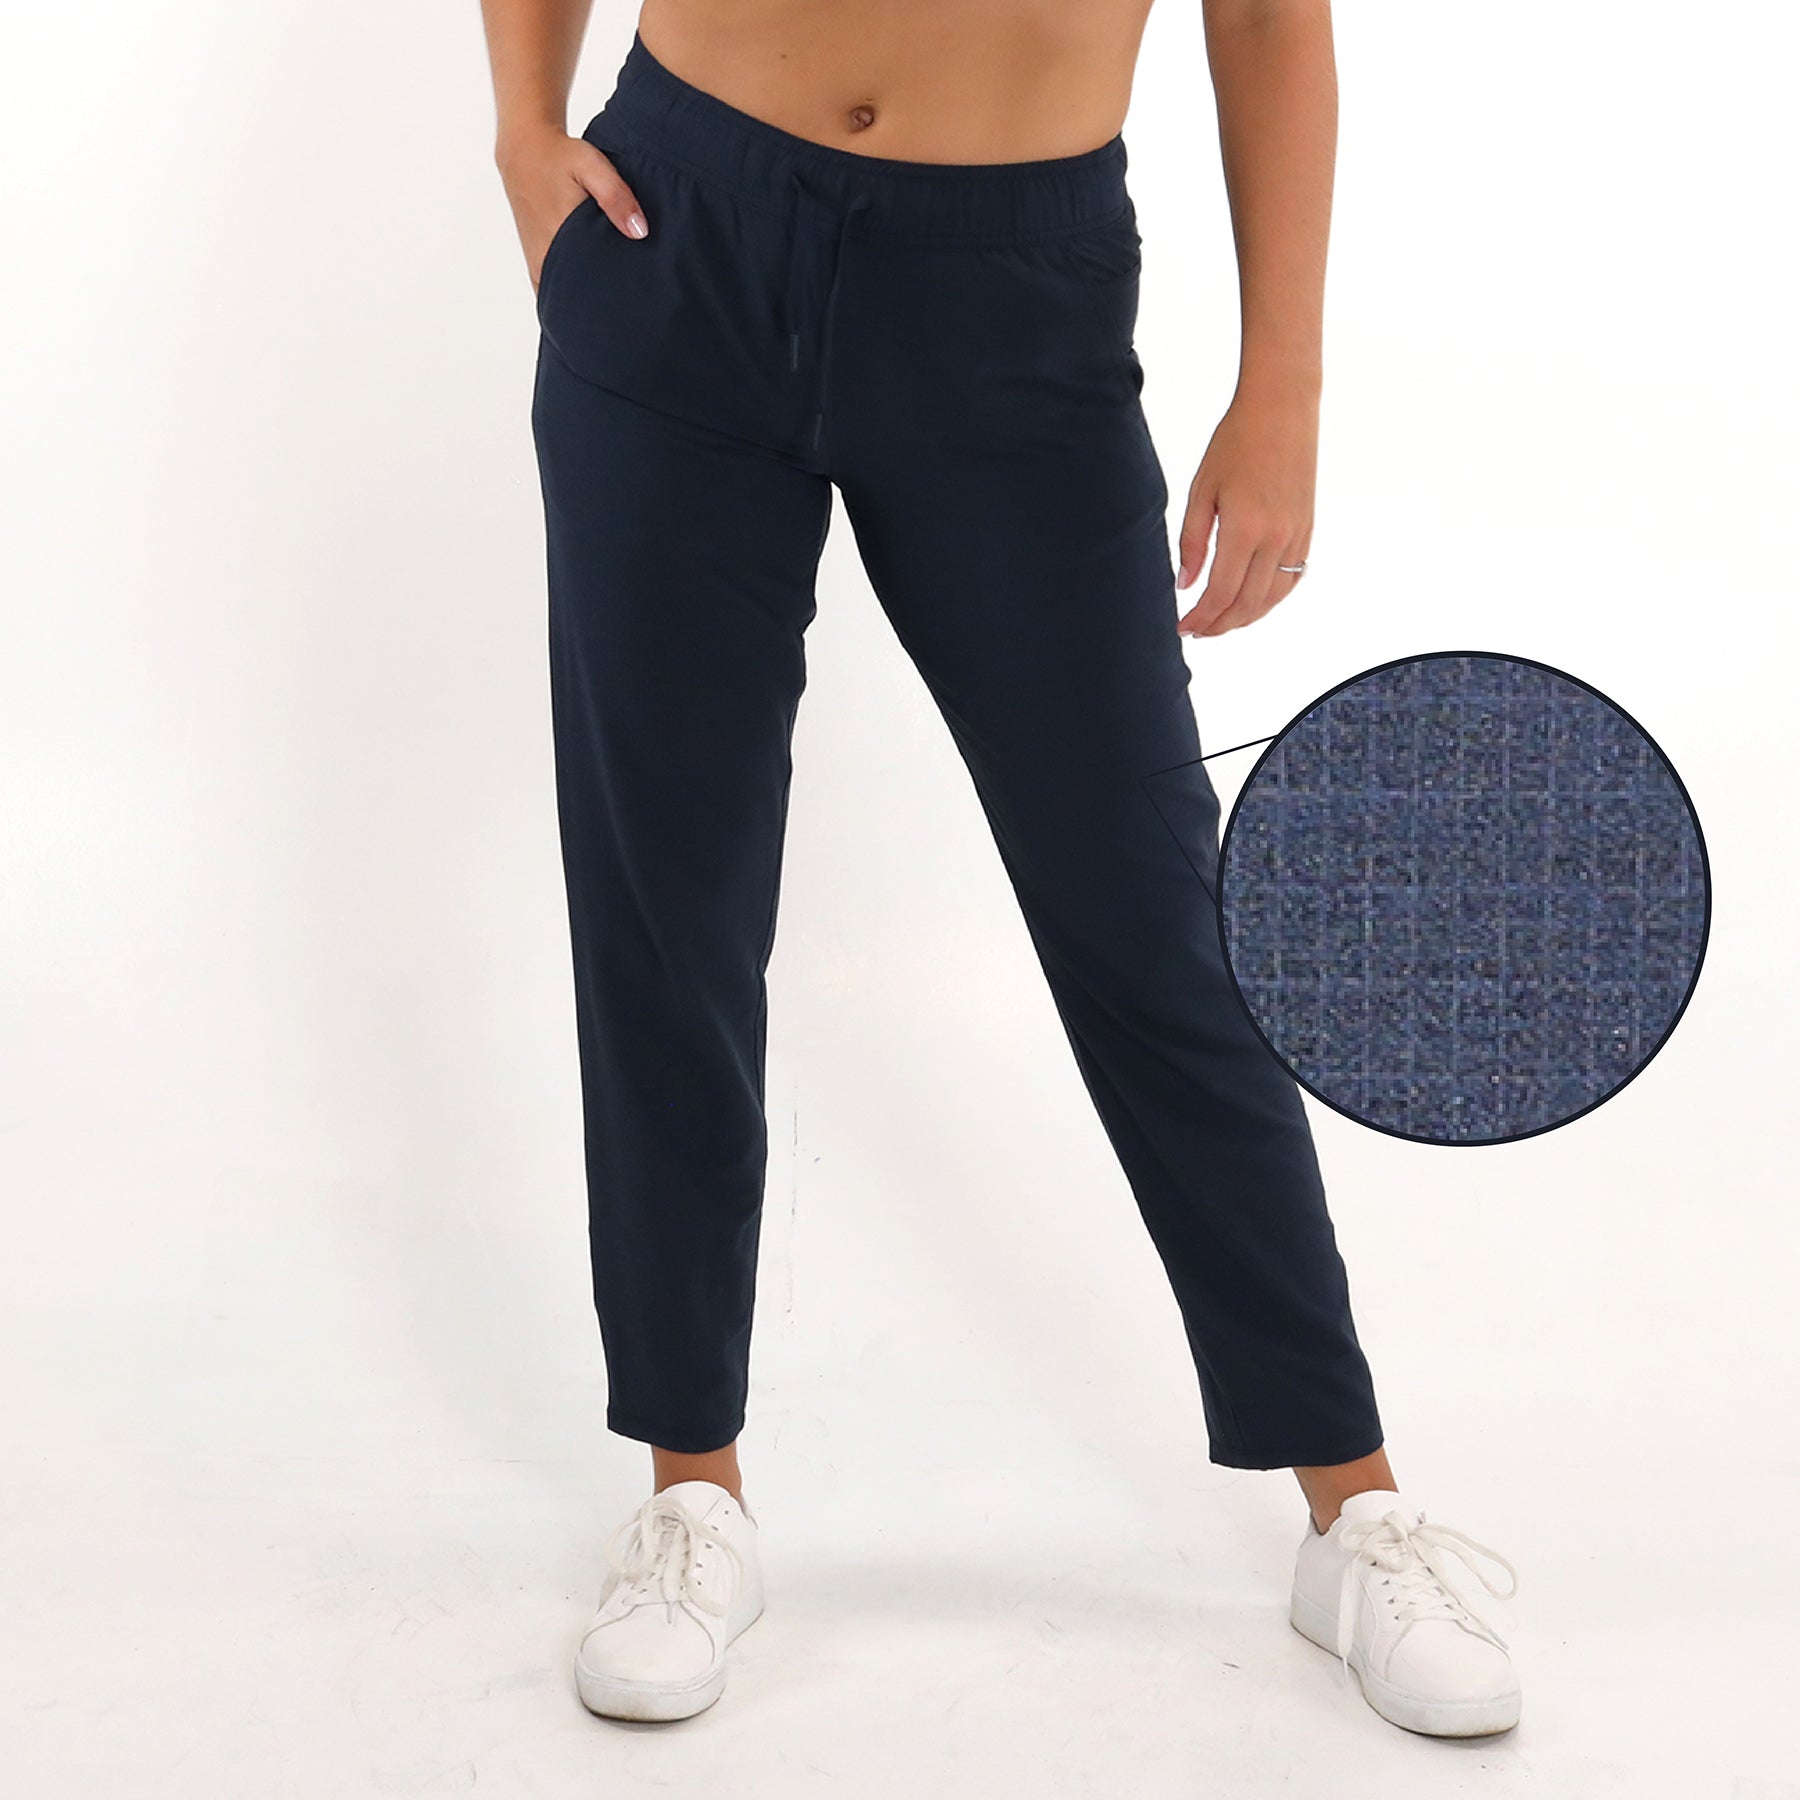 LADIES SOLUTION JOGGER - NAVY HEATHER – AndersonOrd Performance